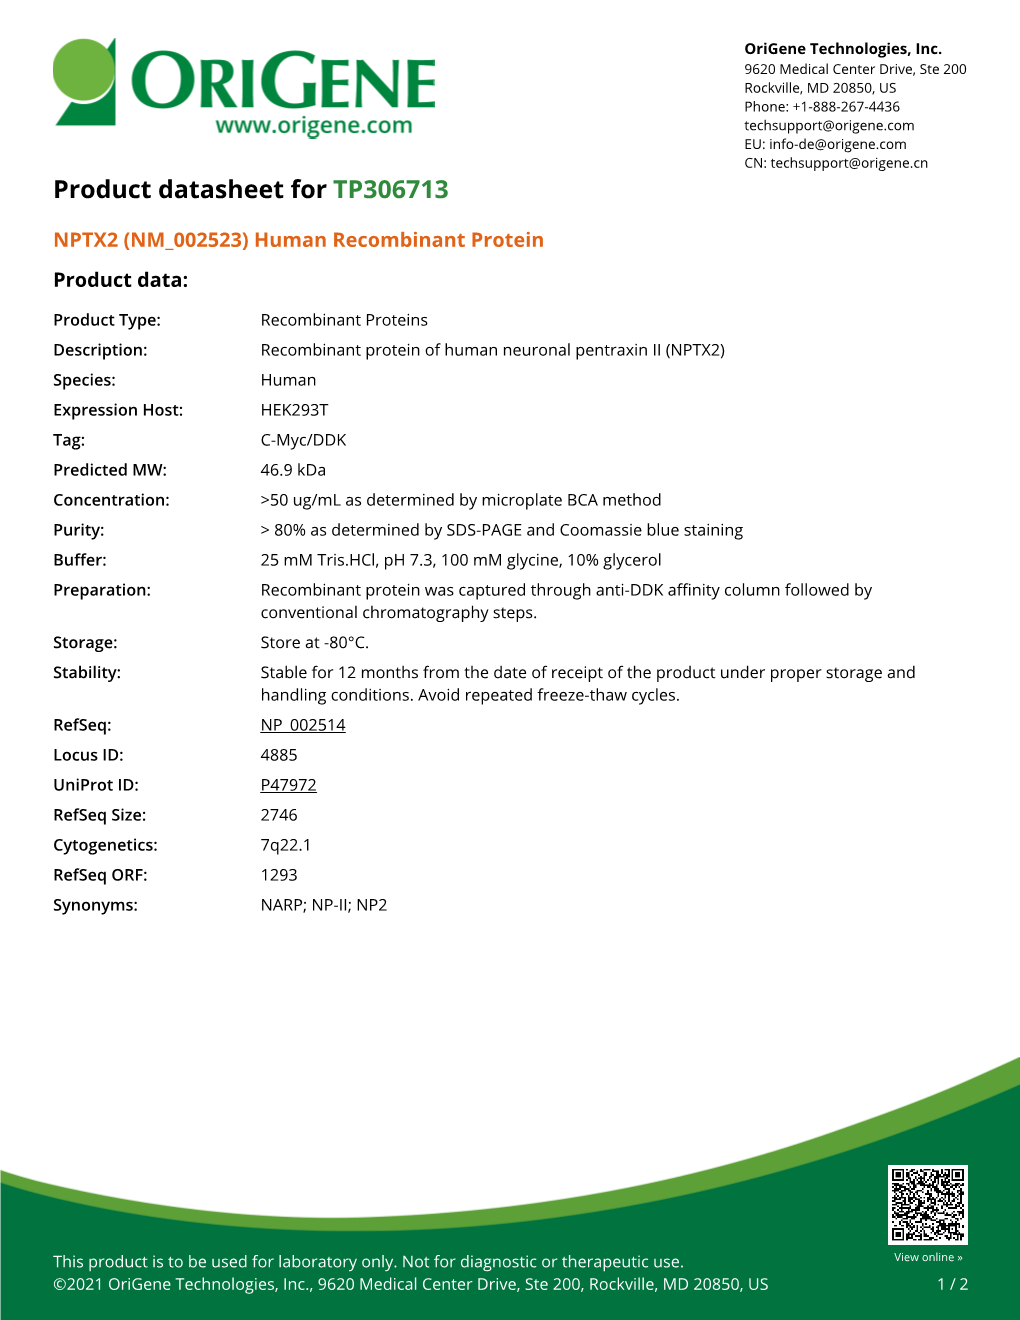 NPTX2 (NM 002523) Human Recombinant Protein Product Data